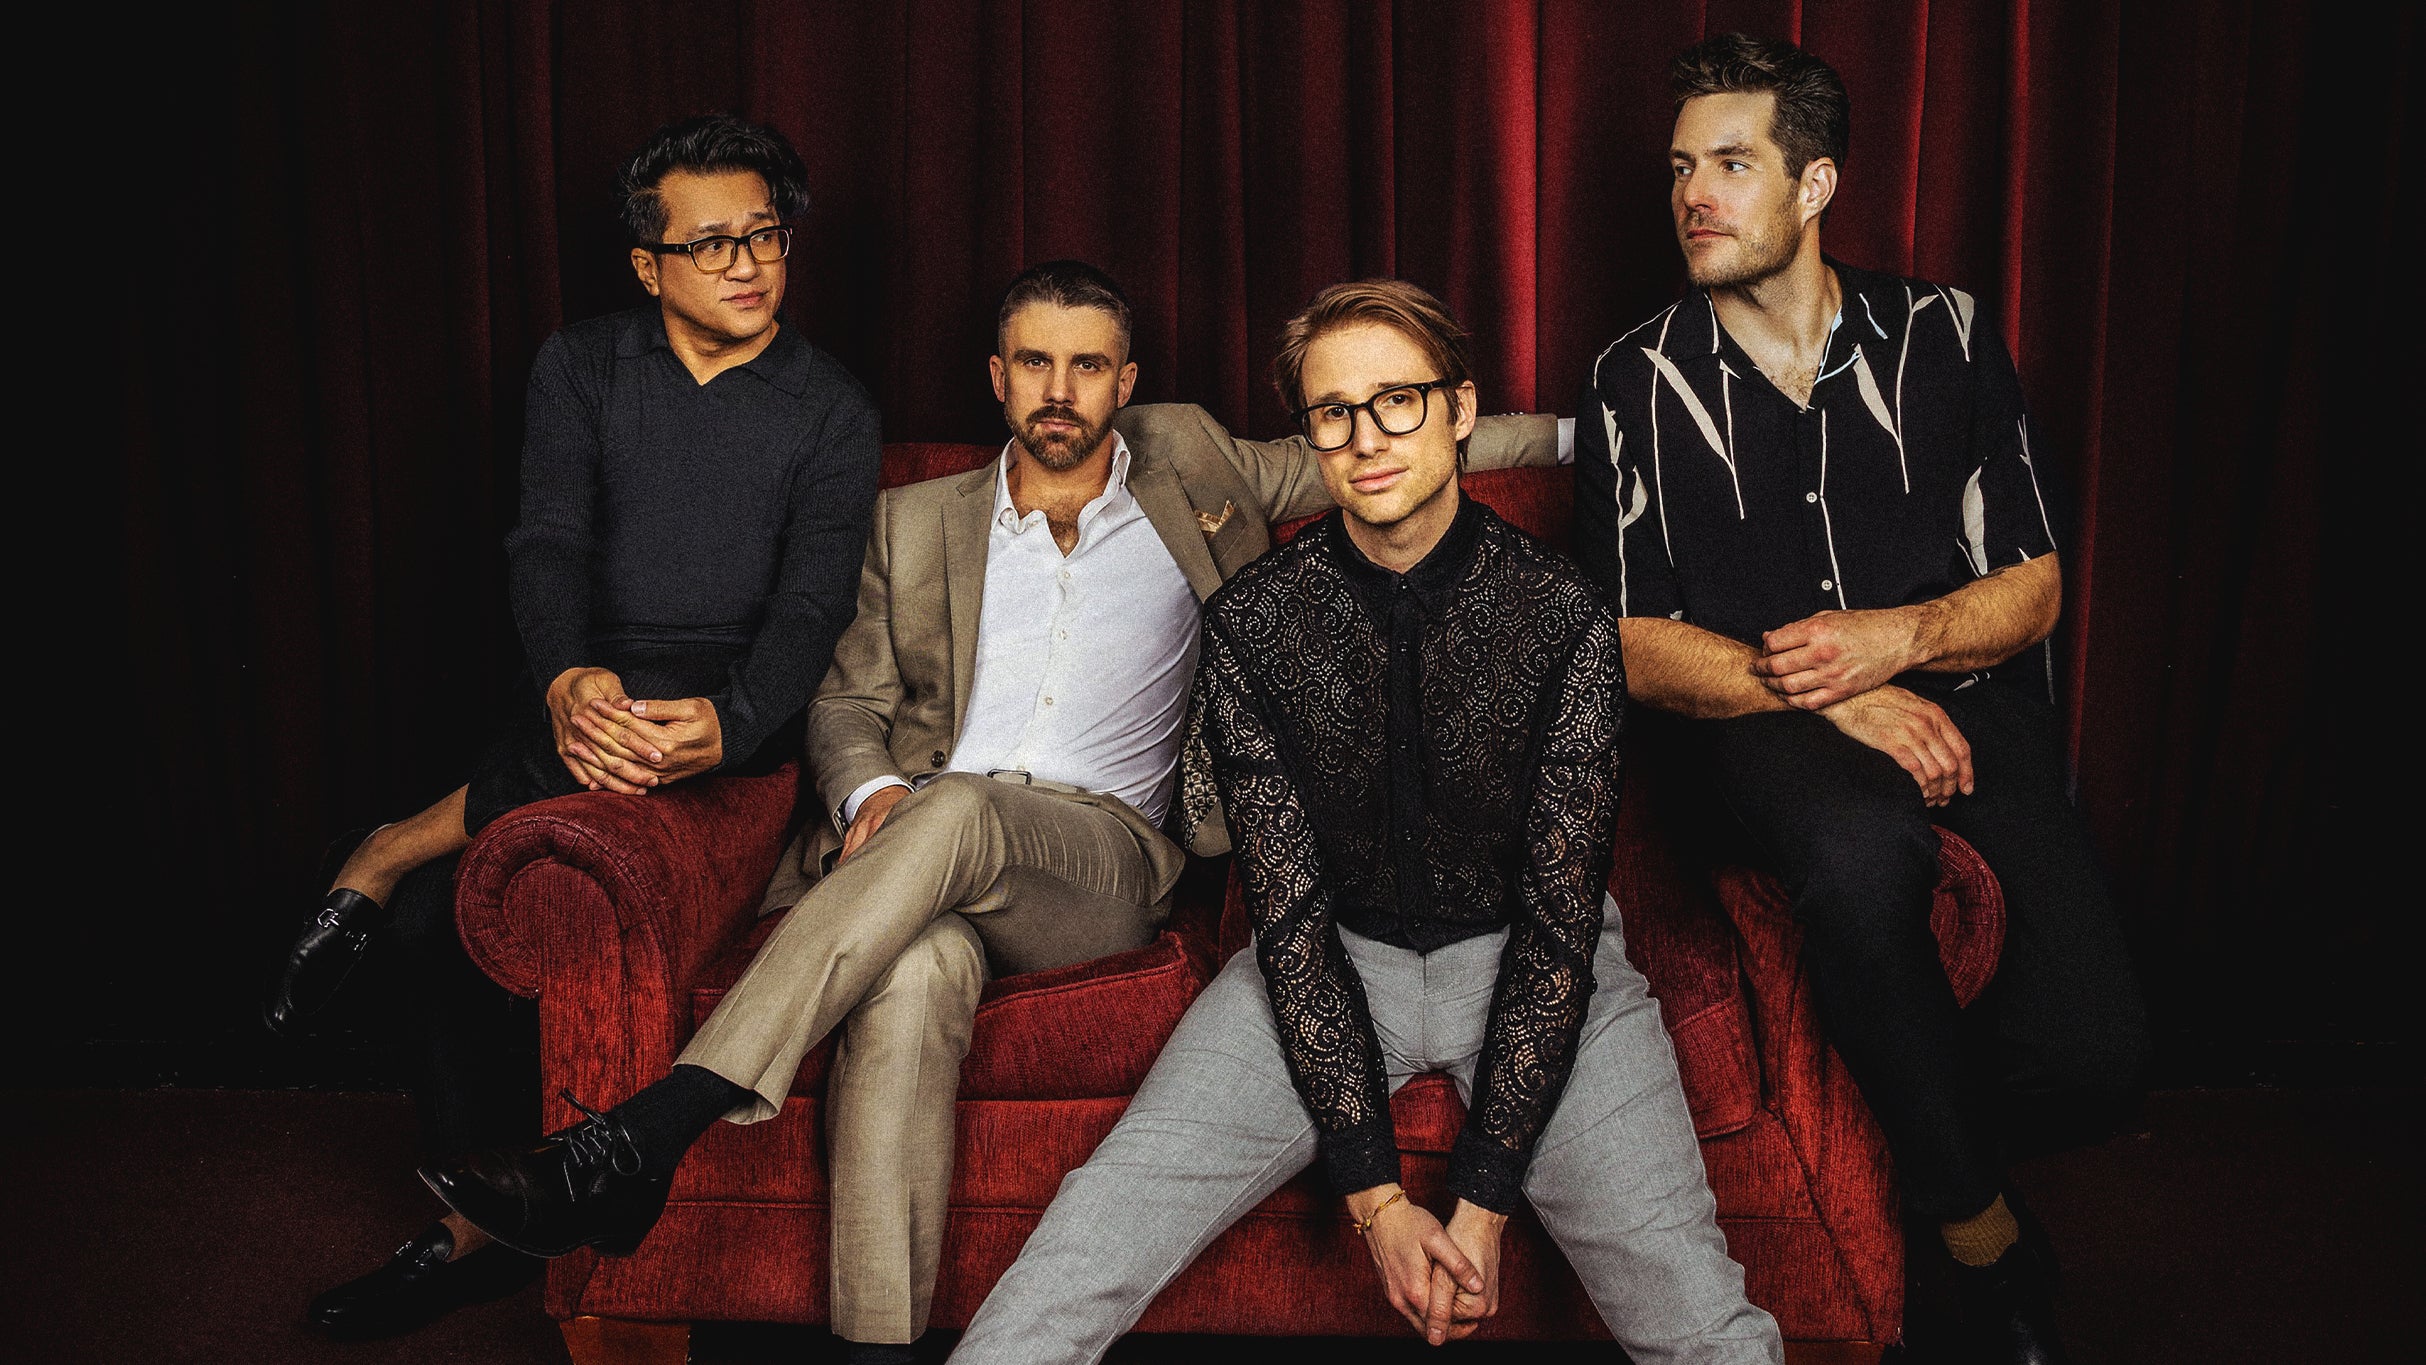 new presale password for Saint Motel advanced tickets in Manchester